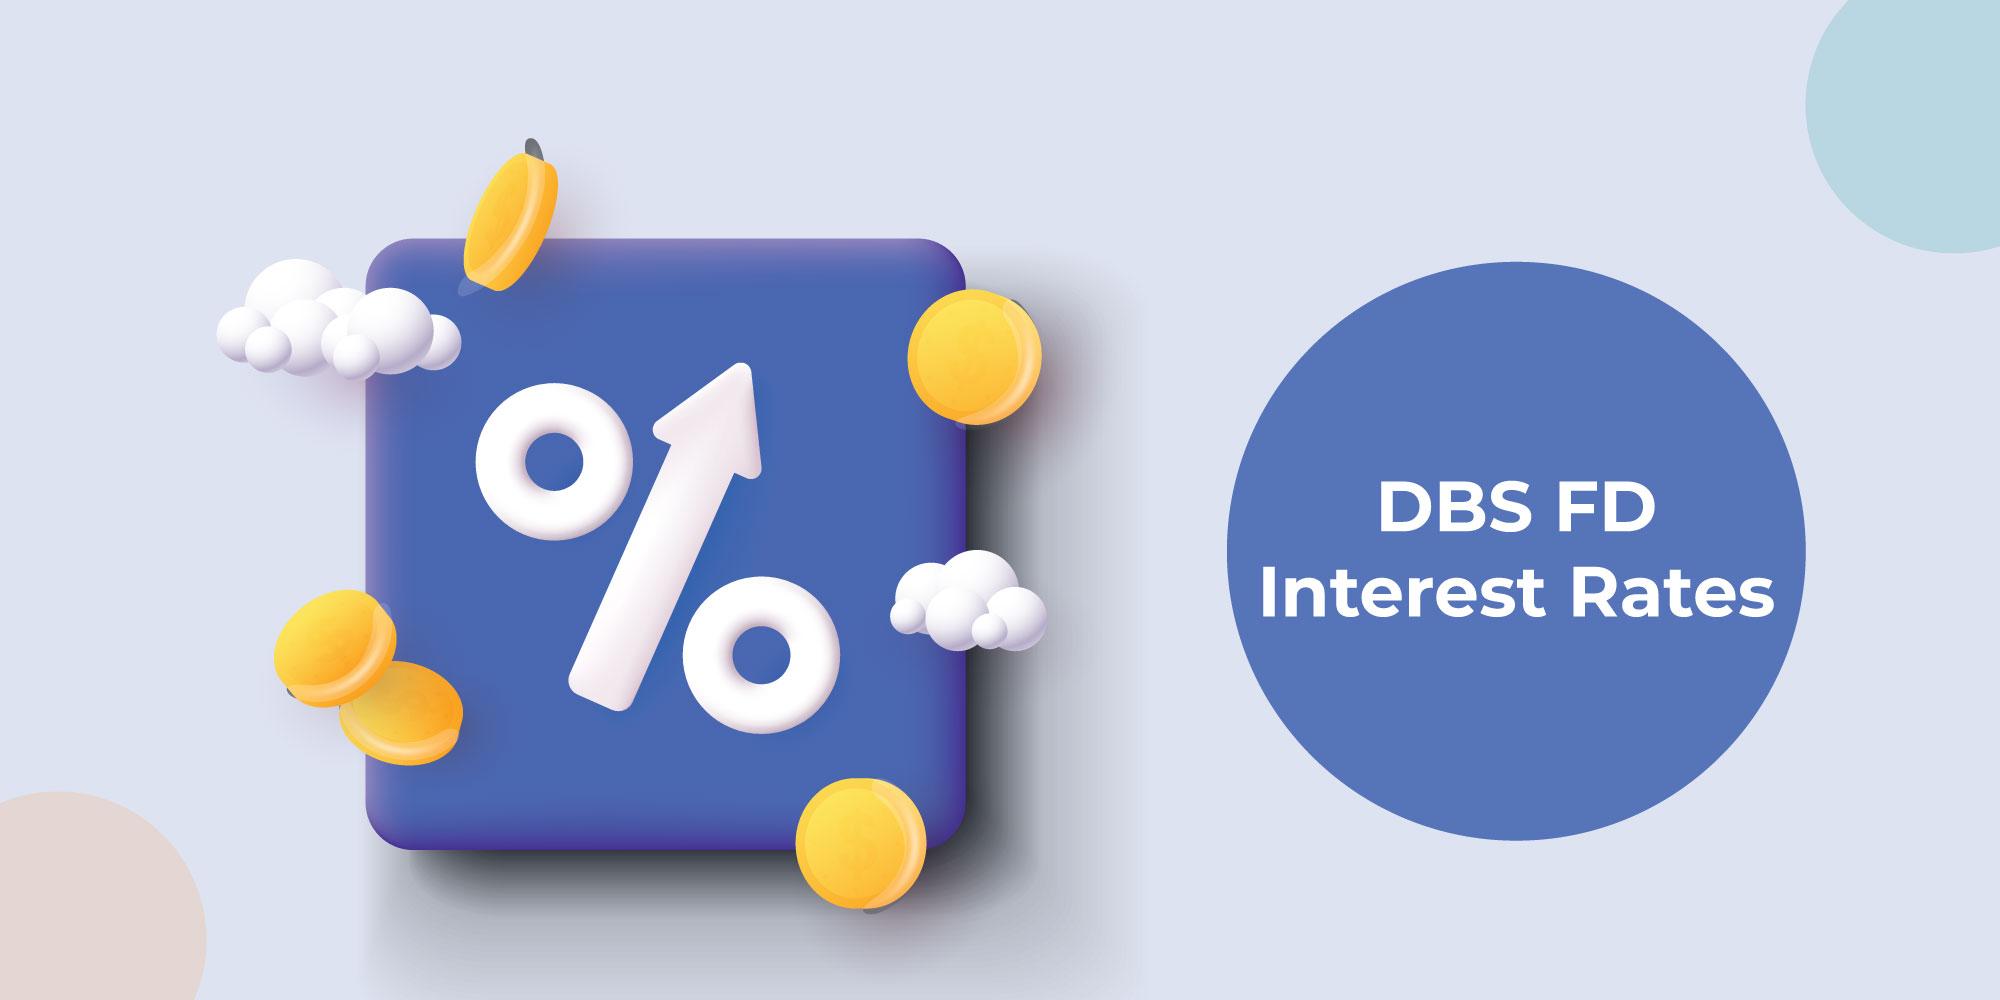 Latest Fixed Deposit Interest Rate of DBS Bank